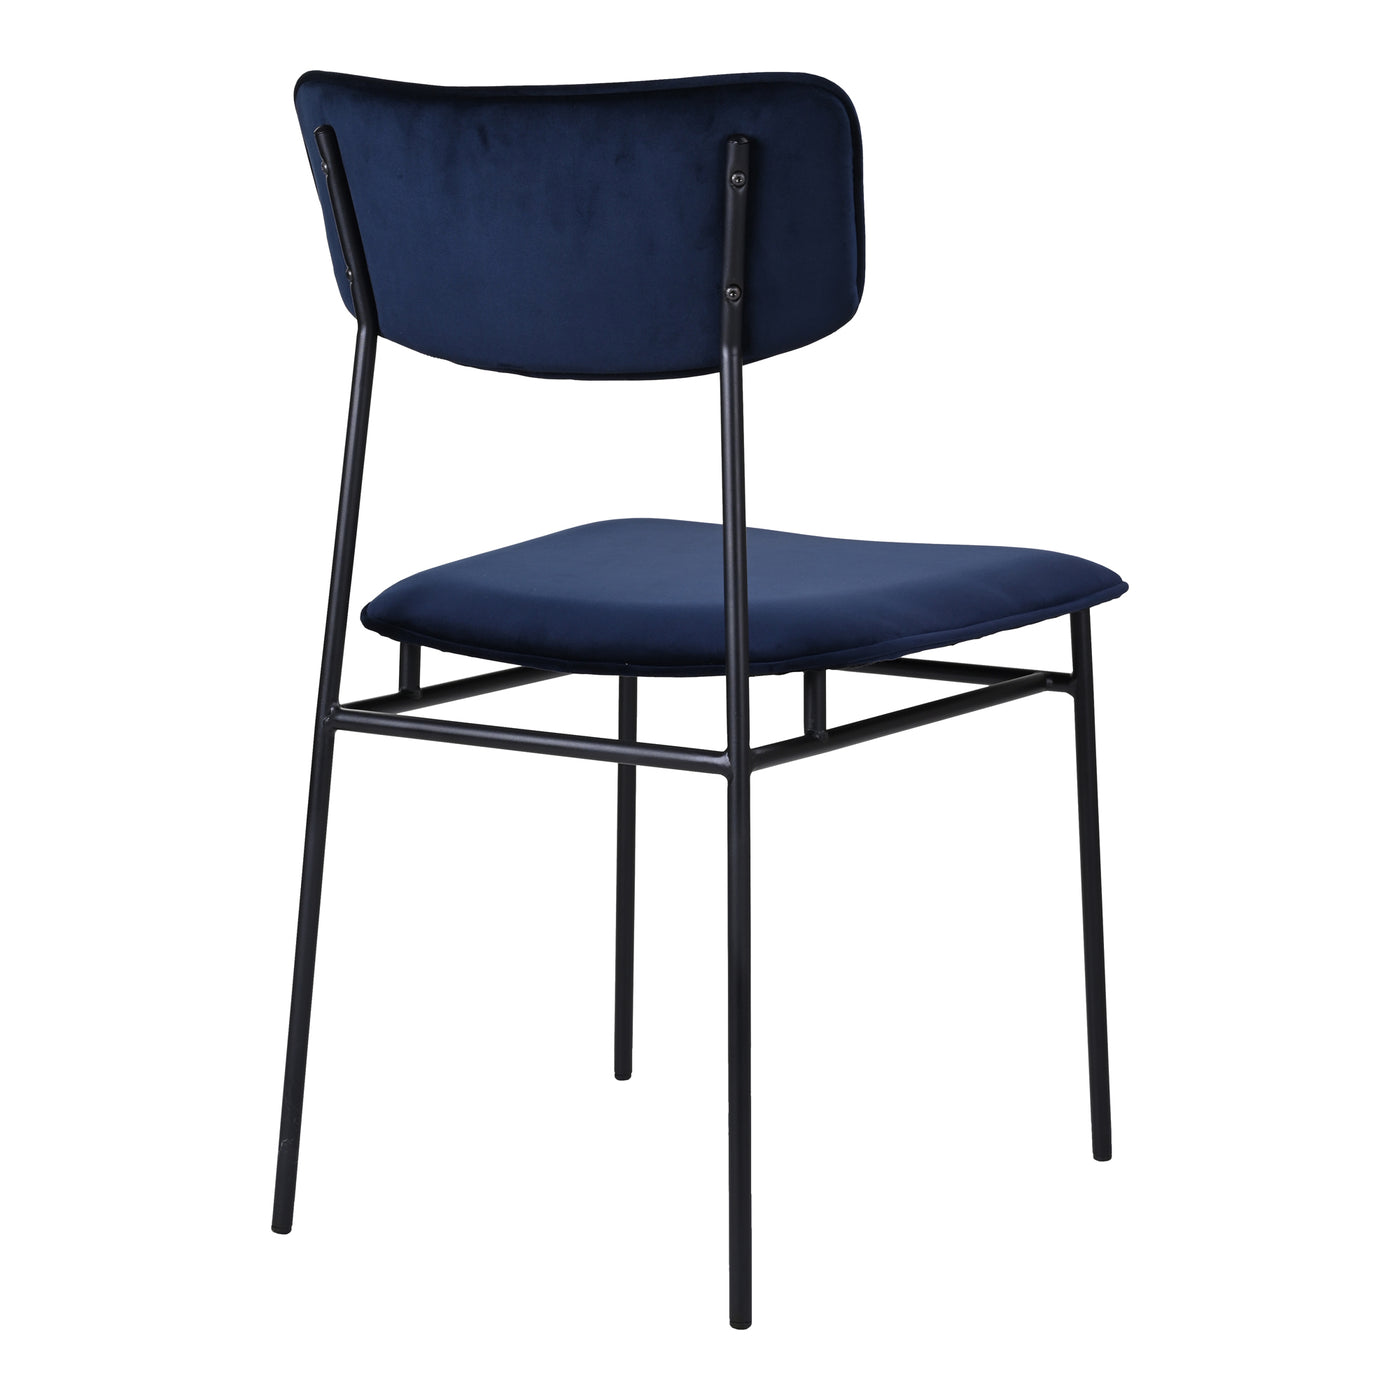 Here to upgrade your space with a purely modern design, the Sailor dining chair features a slender iron frame, comfortable...